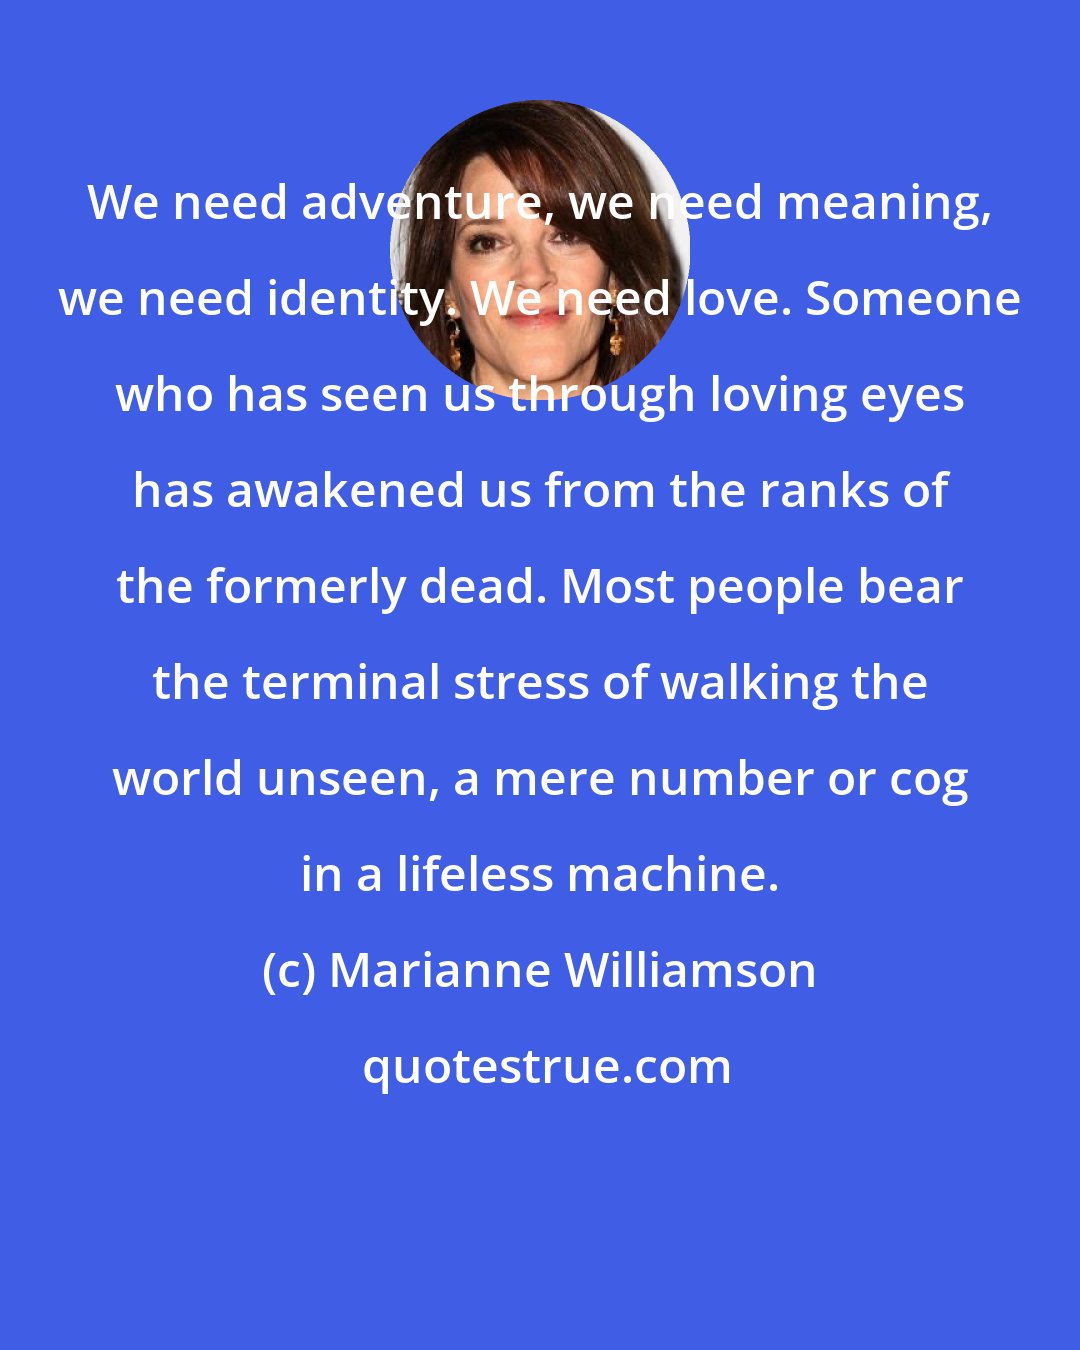 Marianne Williamson: We need adventure, we need meaning, we need identity. We need love. Someone who has seen us through loving eyes has awakened us from the ranks of the formerly dead. Most people bear the terminal stress of walking the world unseen, a mere number or cog in a lifeless machine.